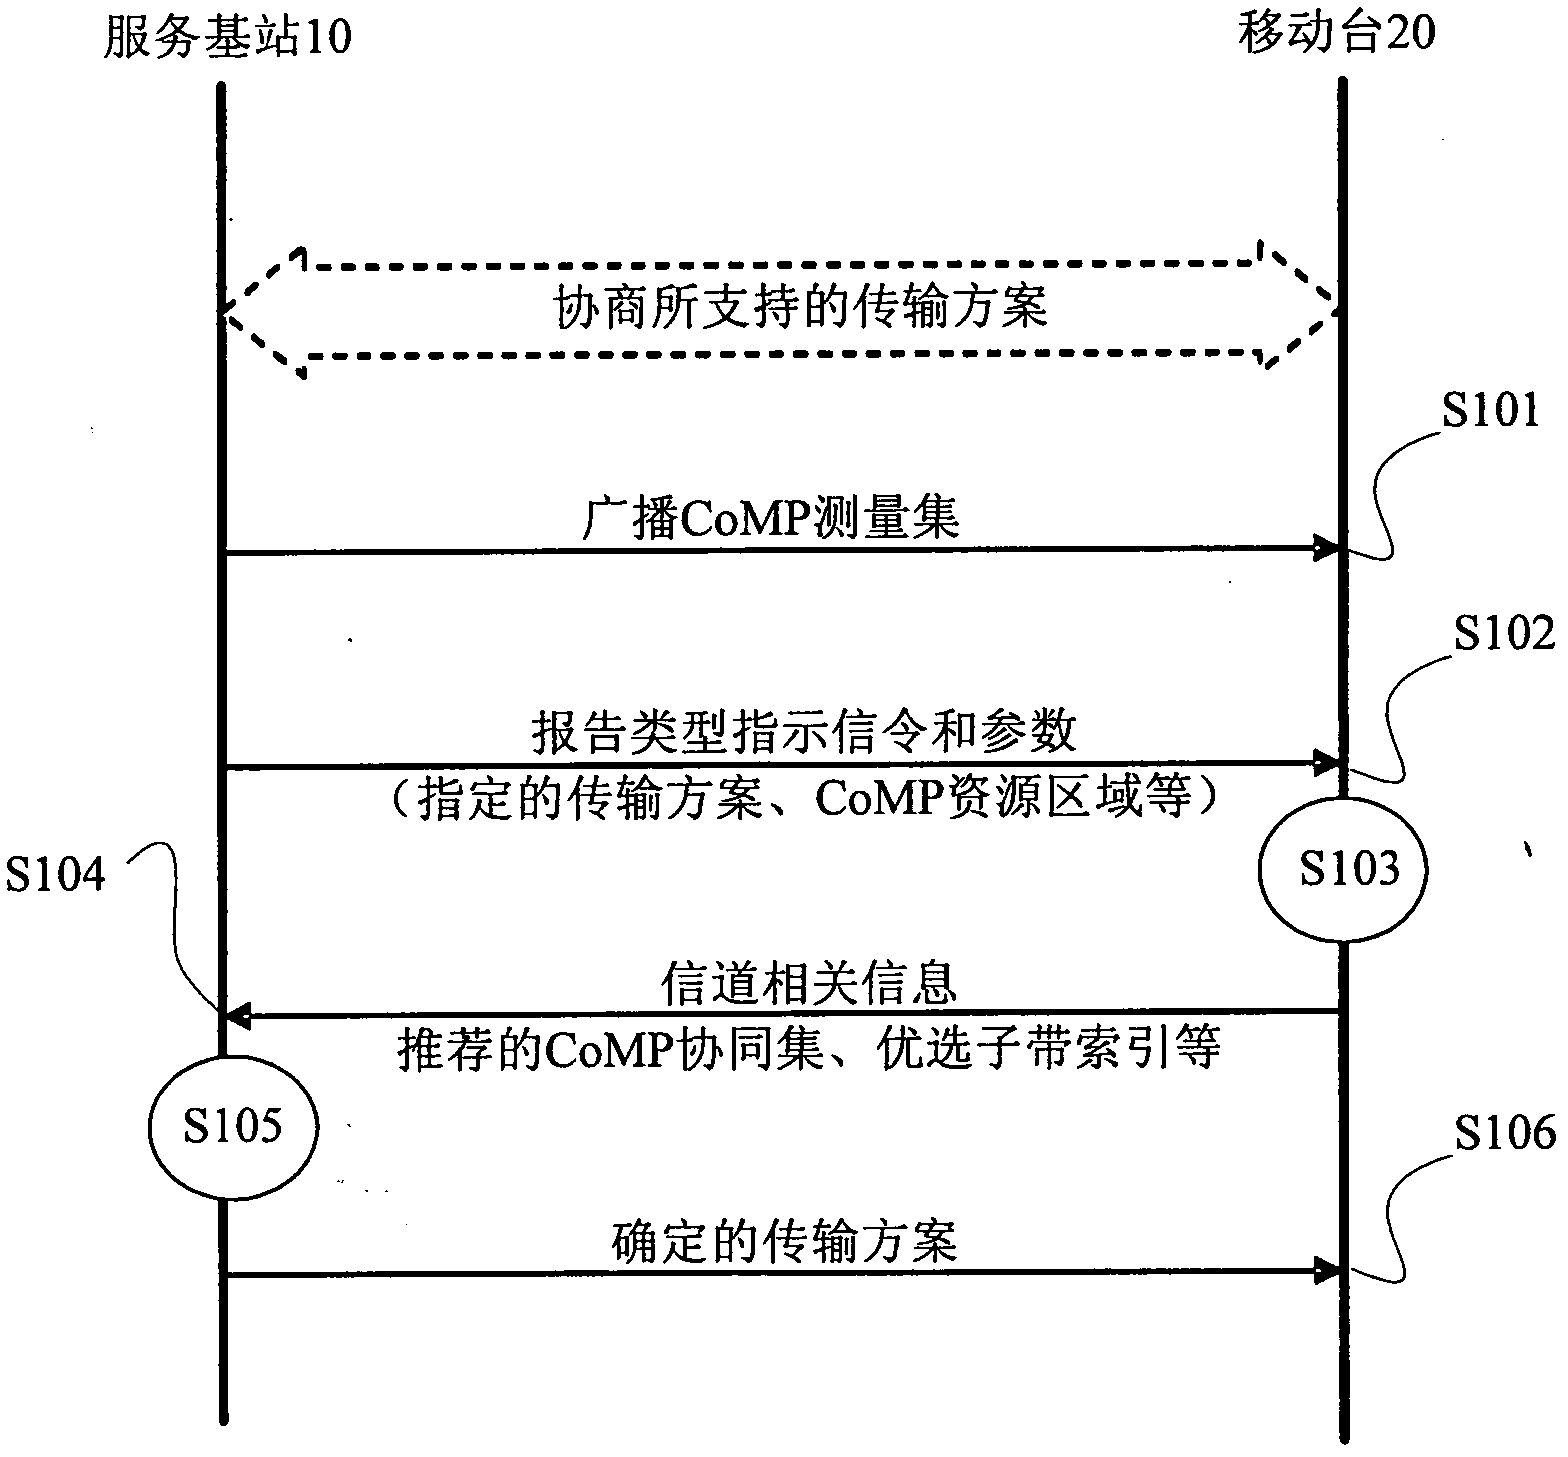 Method and equipment for determining transmission scheme in coordinated multi-point(comp) transmission system